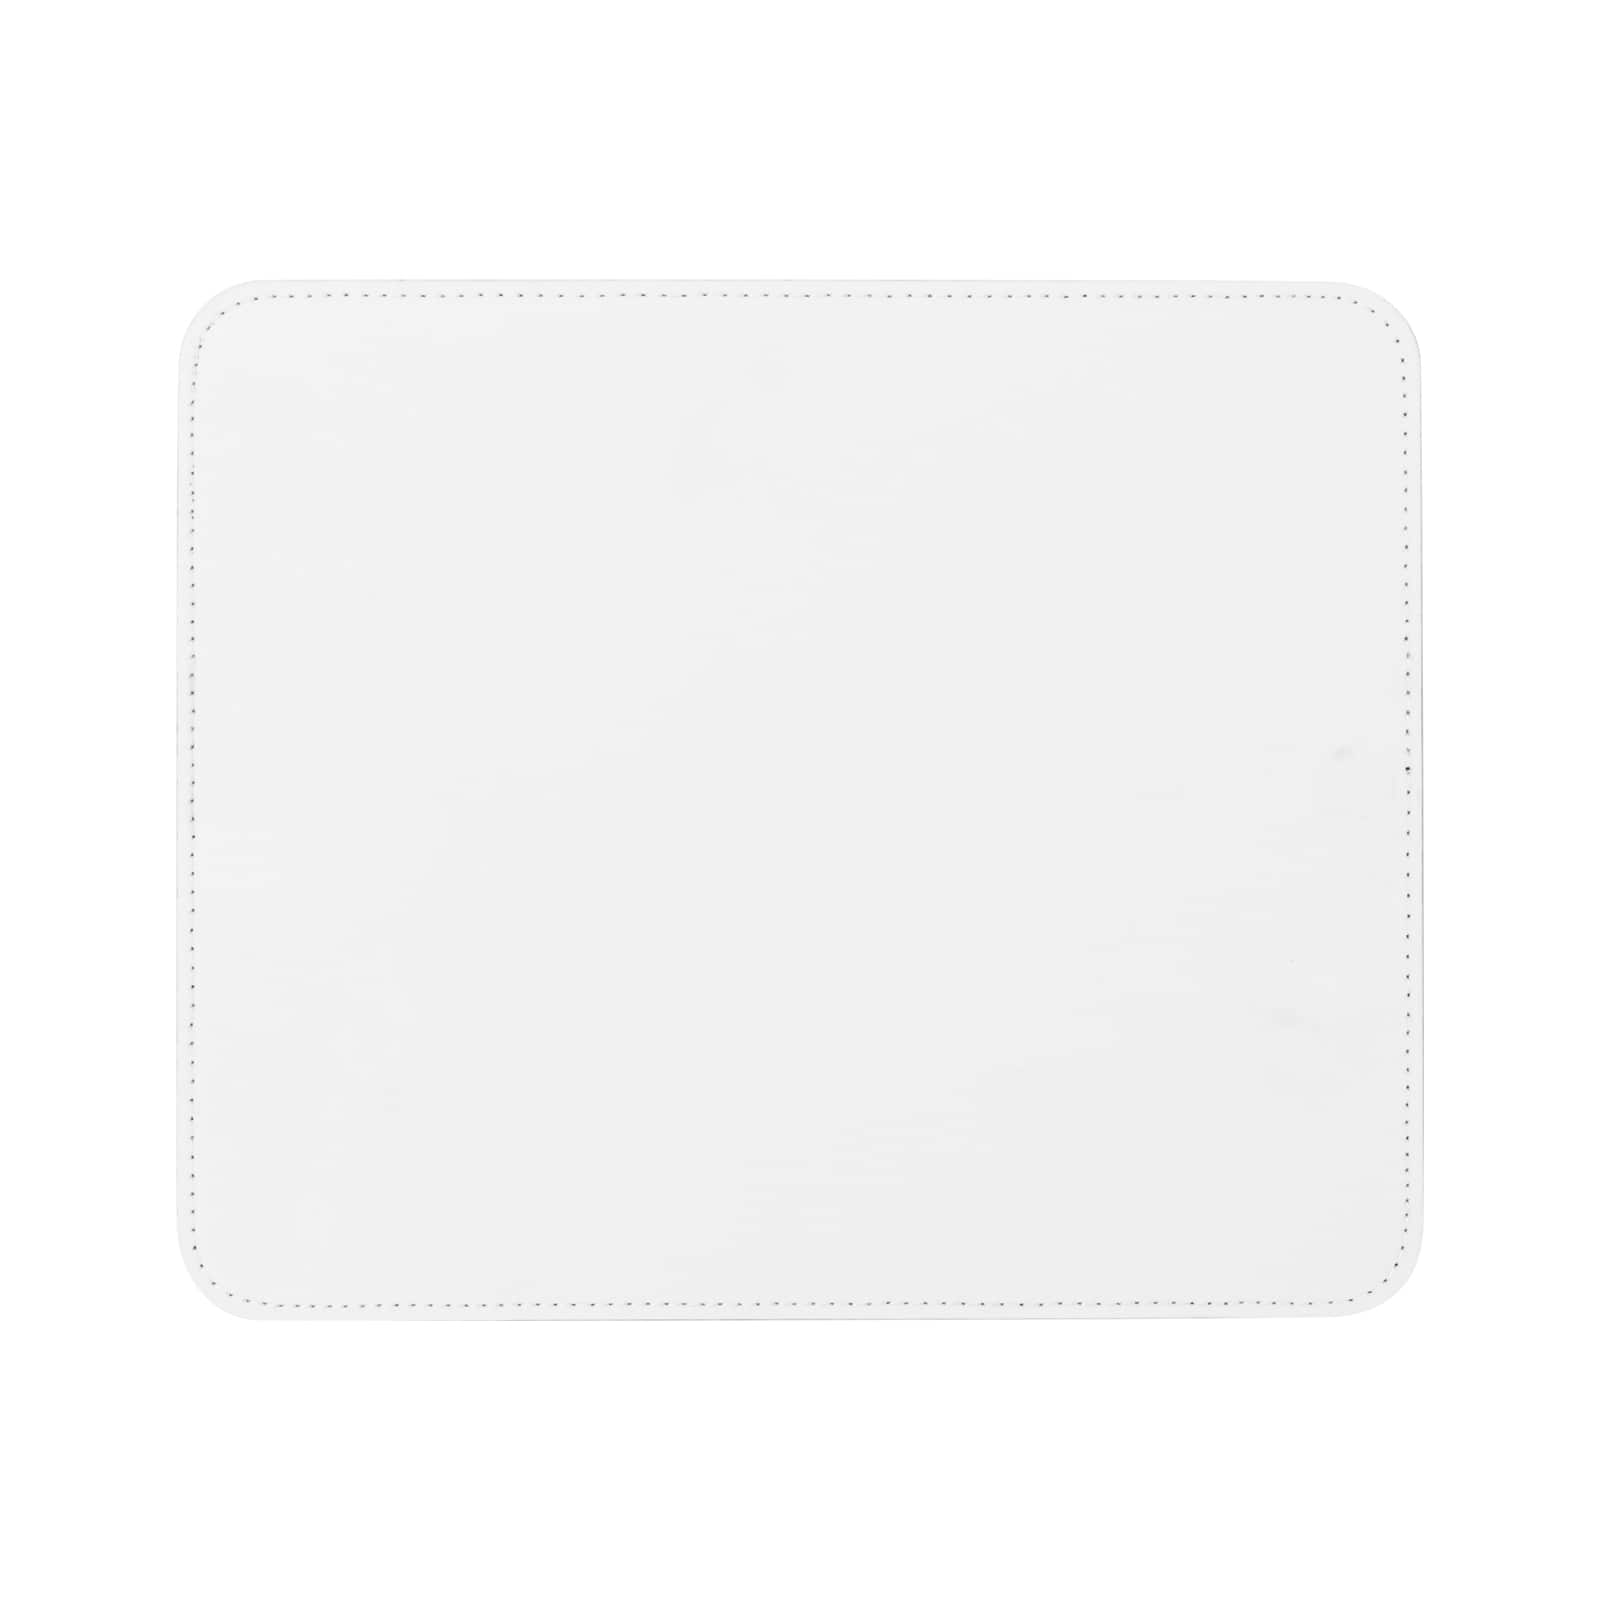 Craft Express White Sublimatable Vegan Leather Placemats, 4ct.